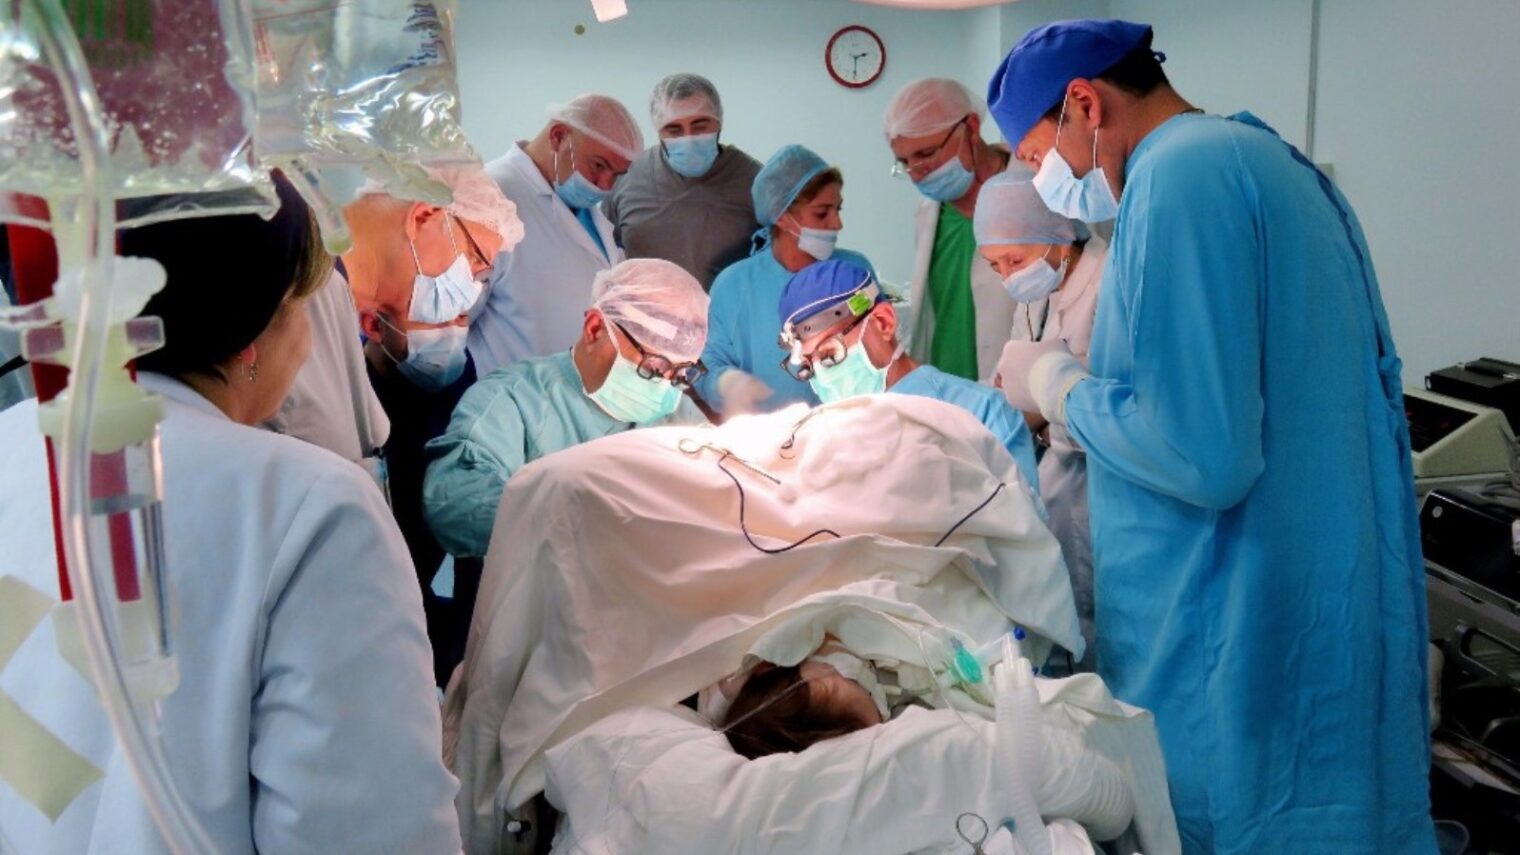 Operating on a patient in Tbilisi are Rambam surgeons Dr. Ran Steinberg, center right, and Tblisi native Dr. Arcadi Vachian. Photo courtesy of Rambam Health Care Campus